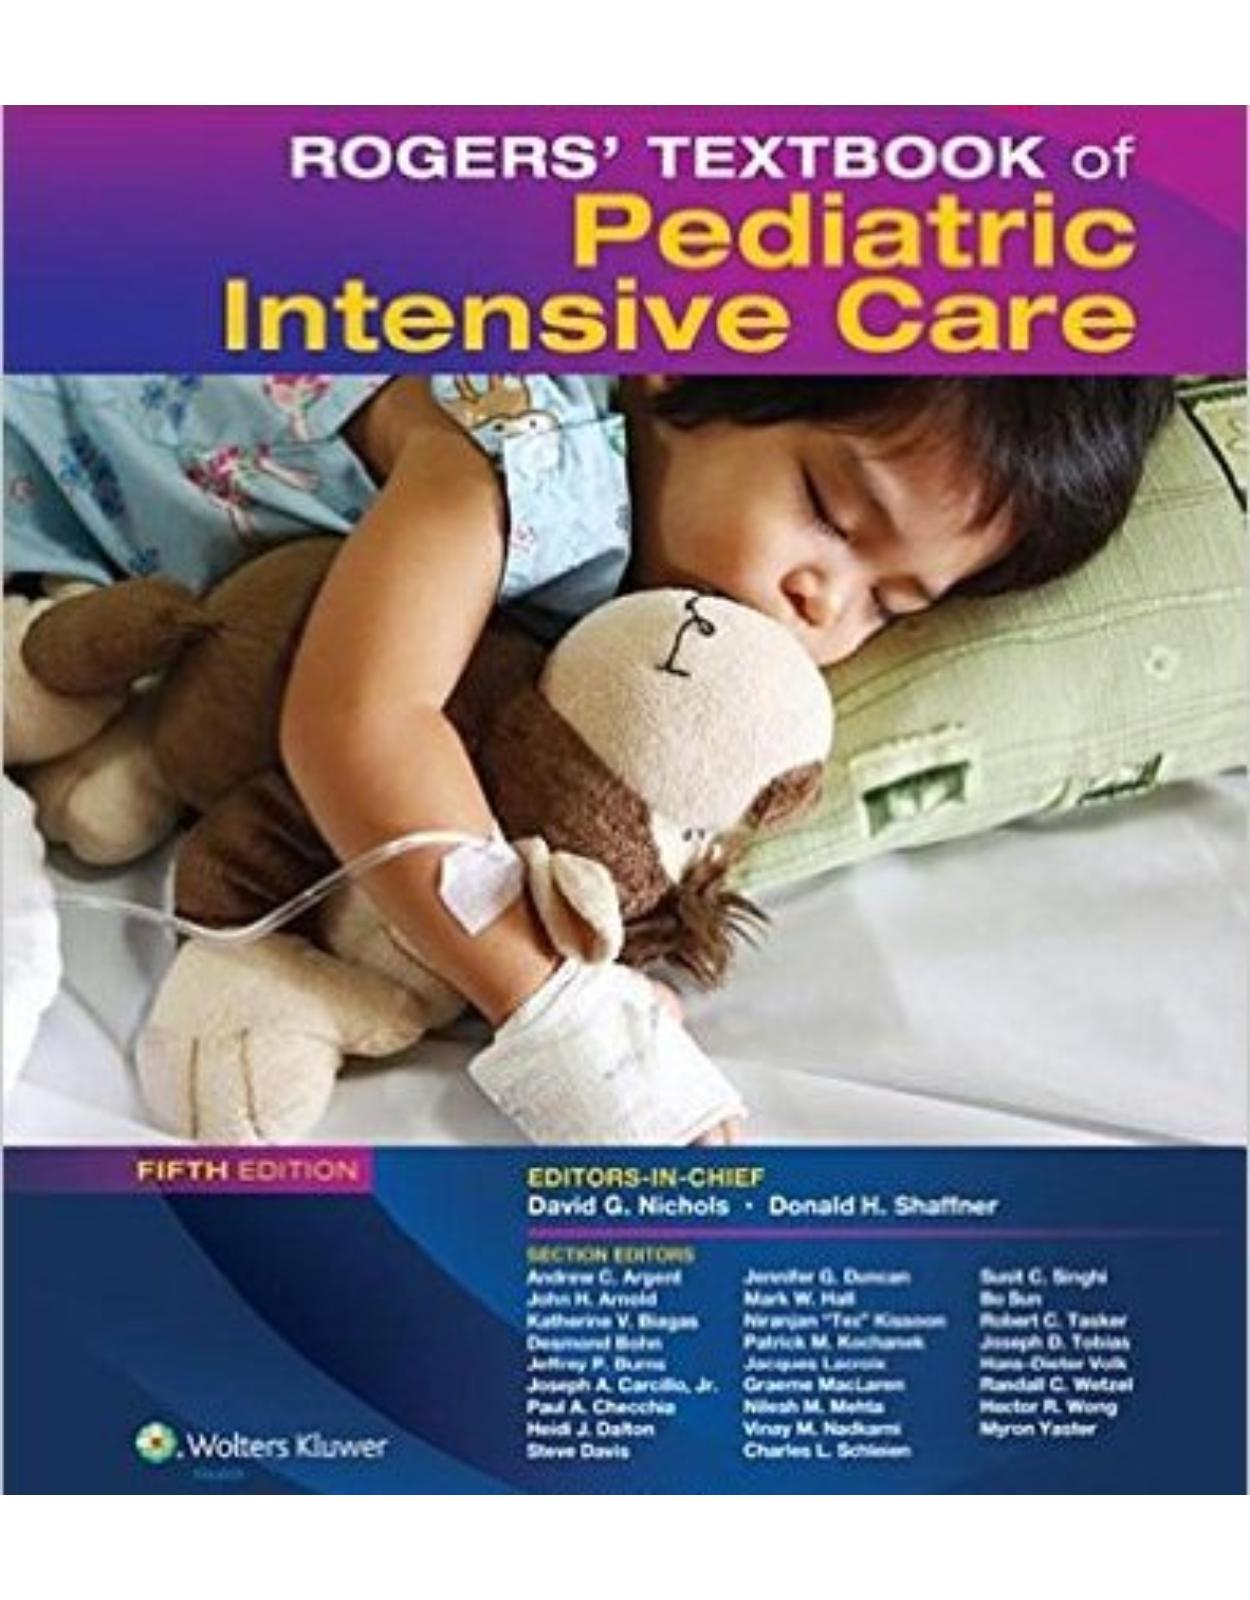 Rogers' Textbook of Pediatric Intensive Care Fifth Edition